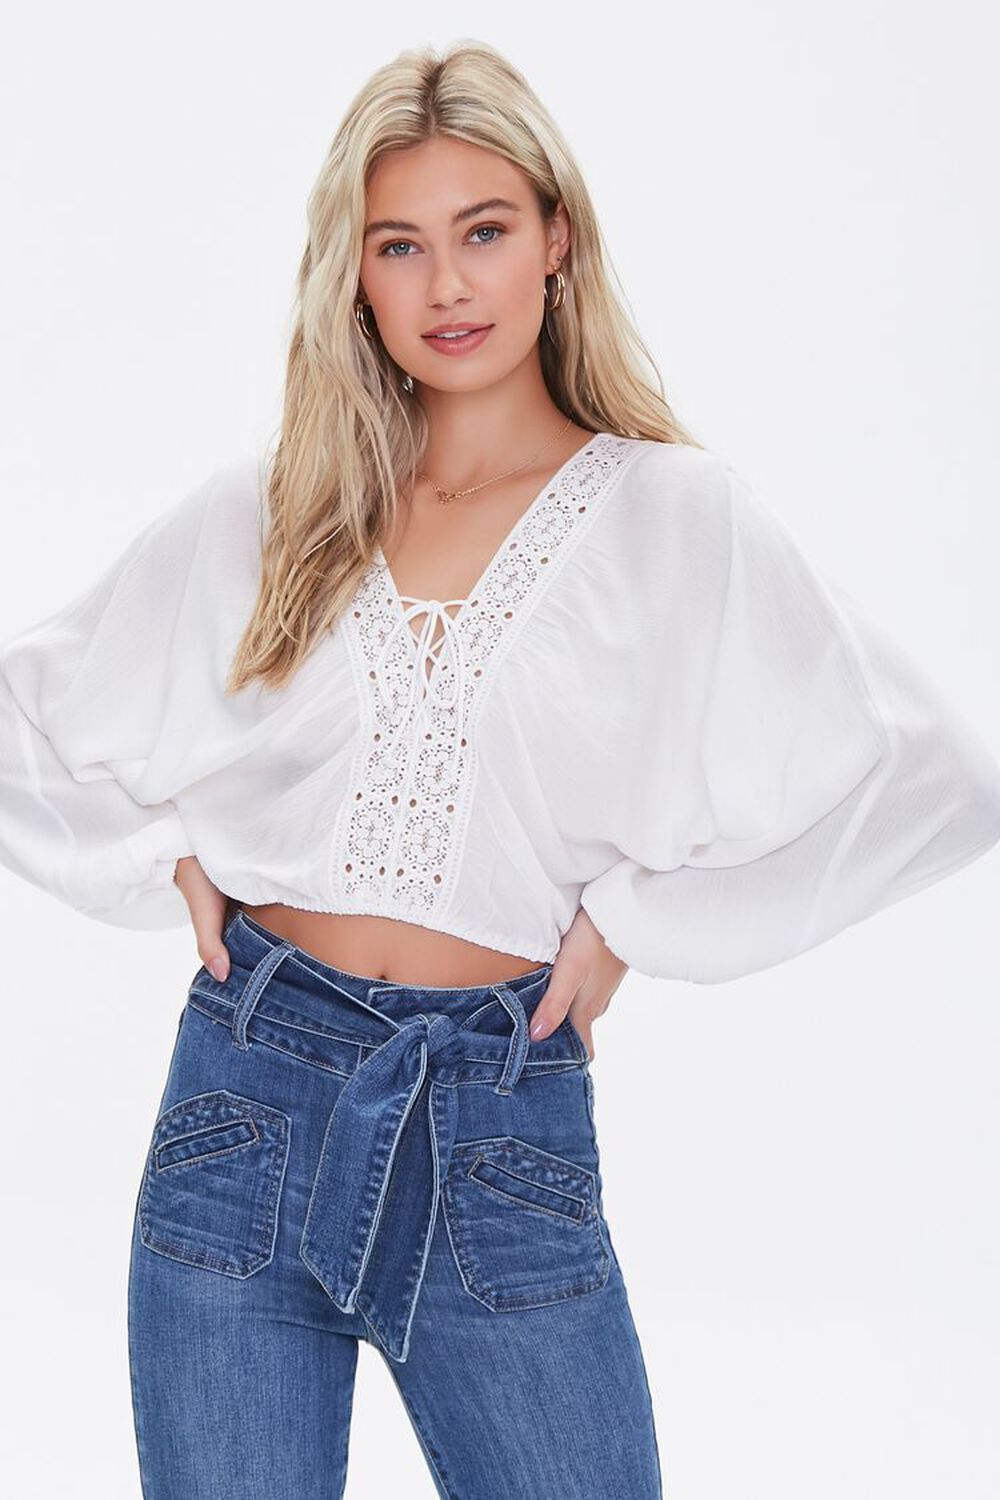 IVORY Lace-Up Dolman Crop Top, image 1